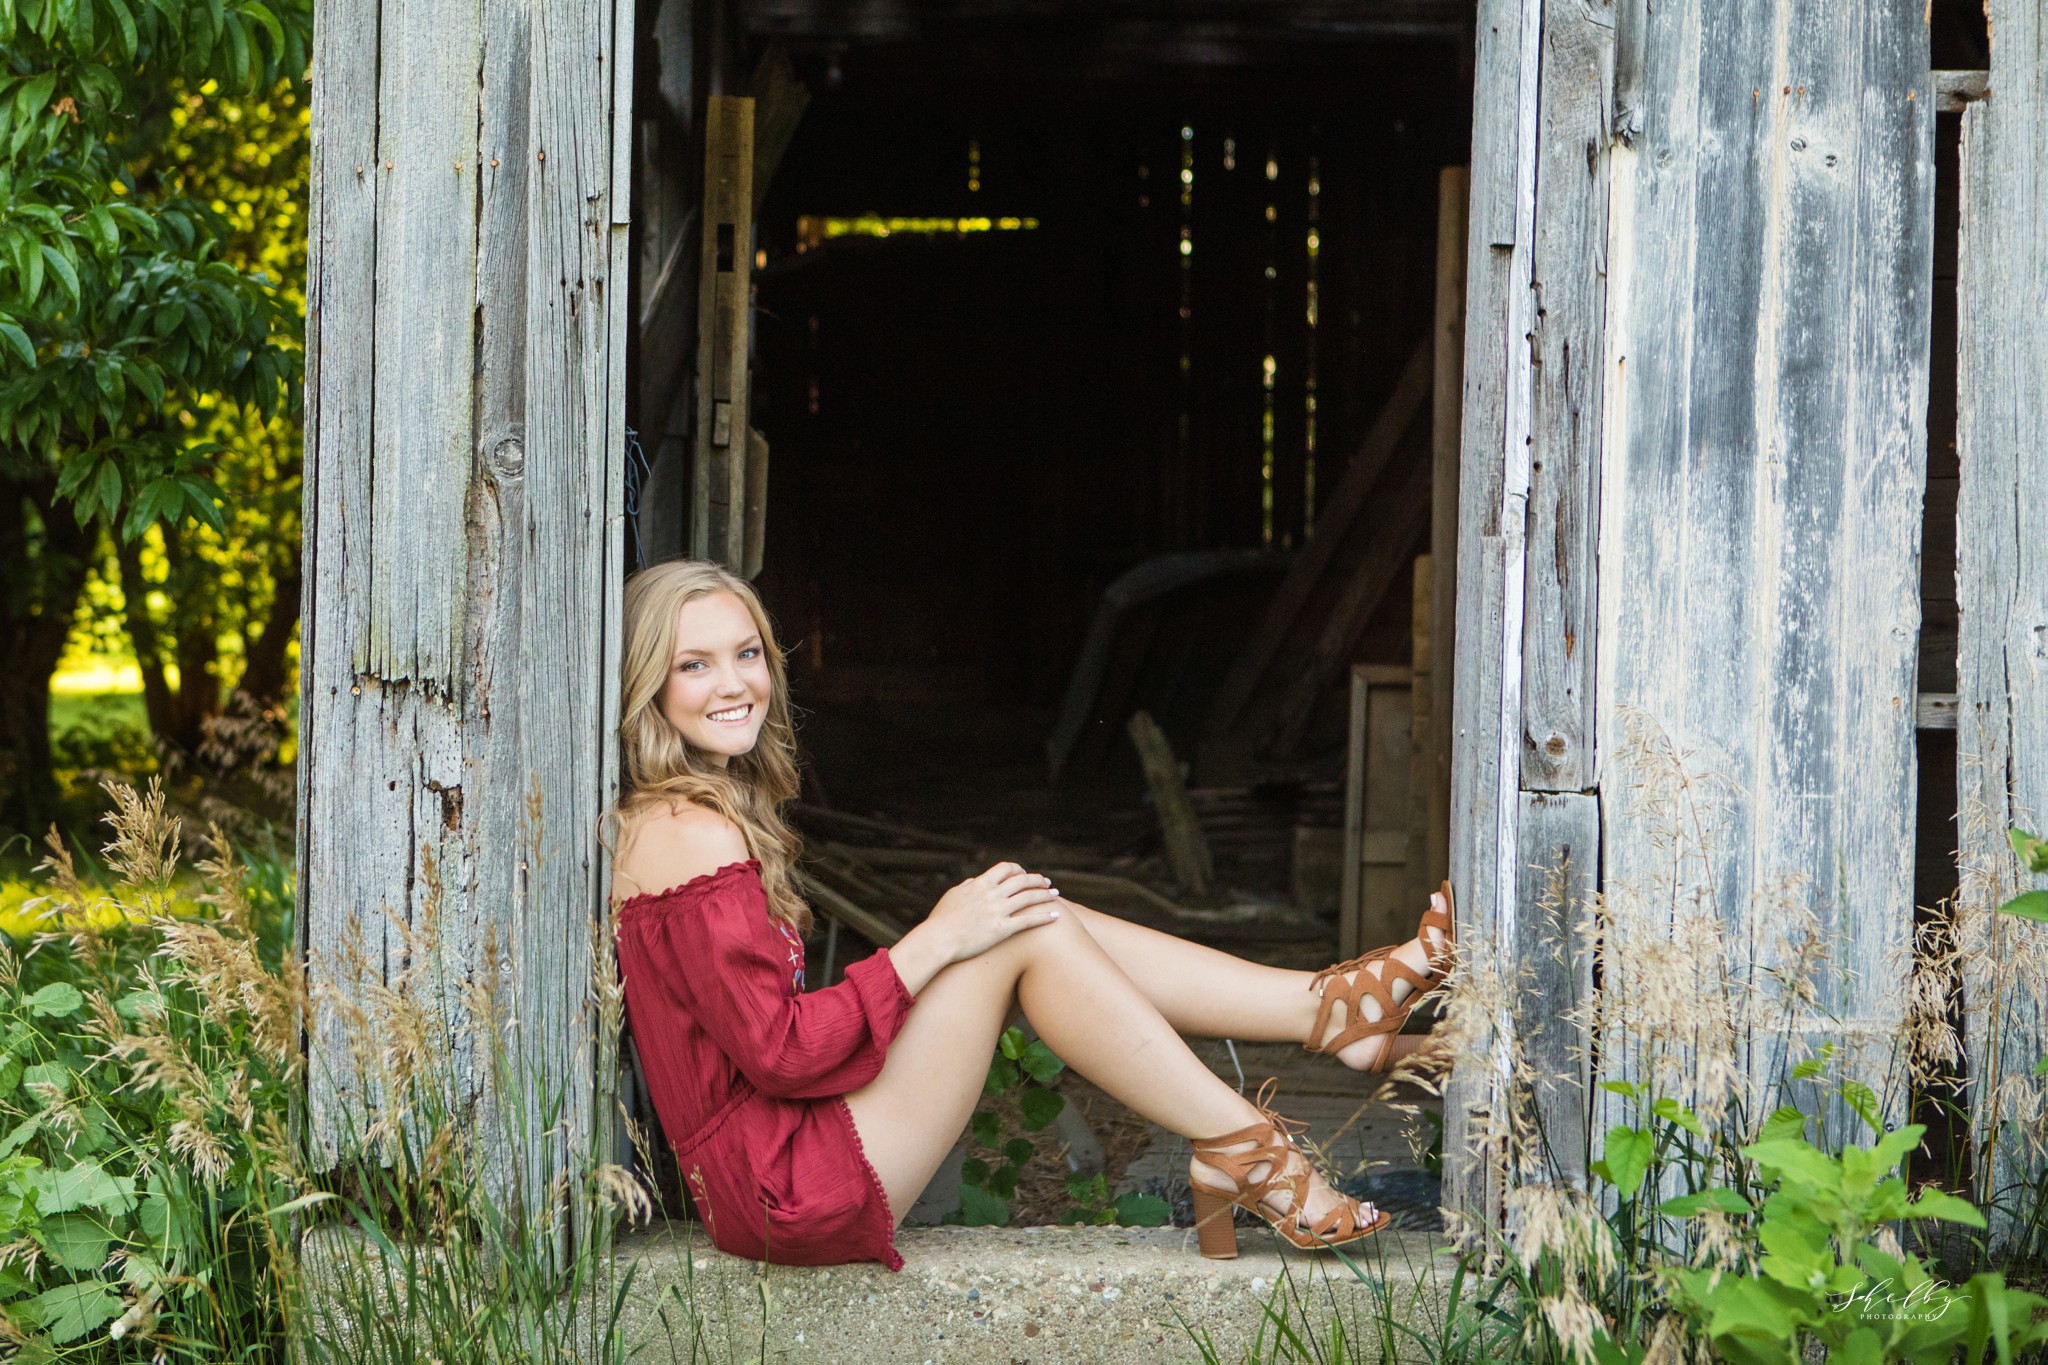 country senior pictures